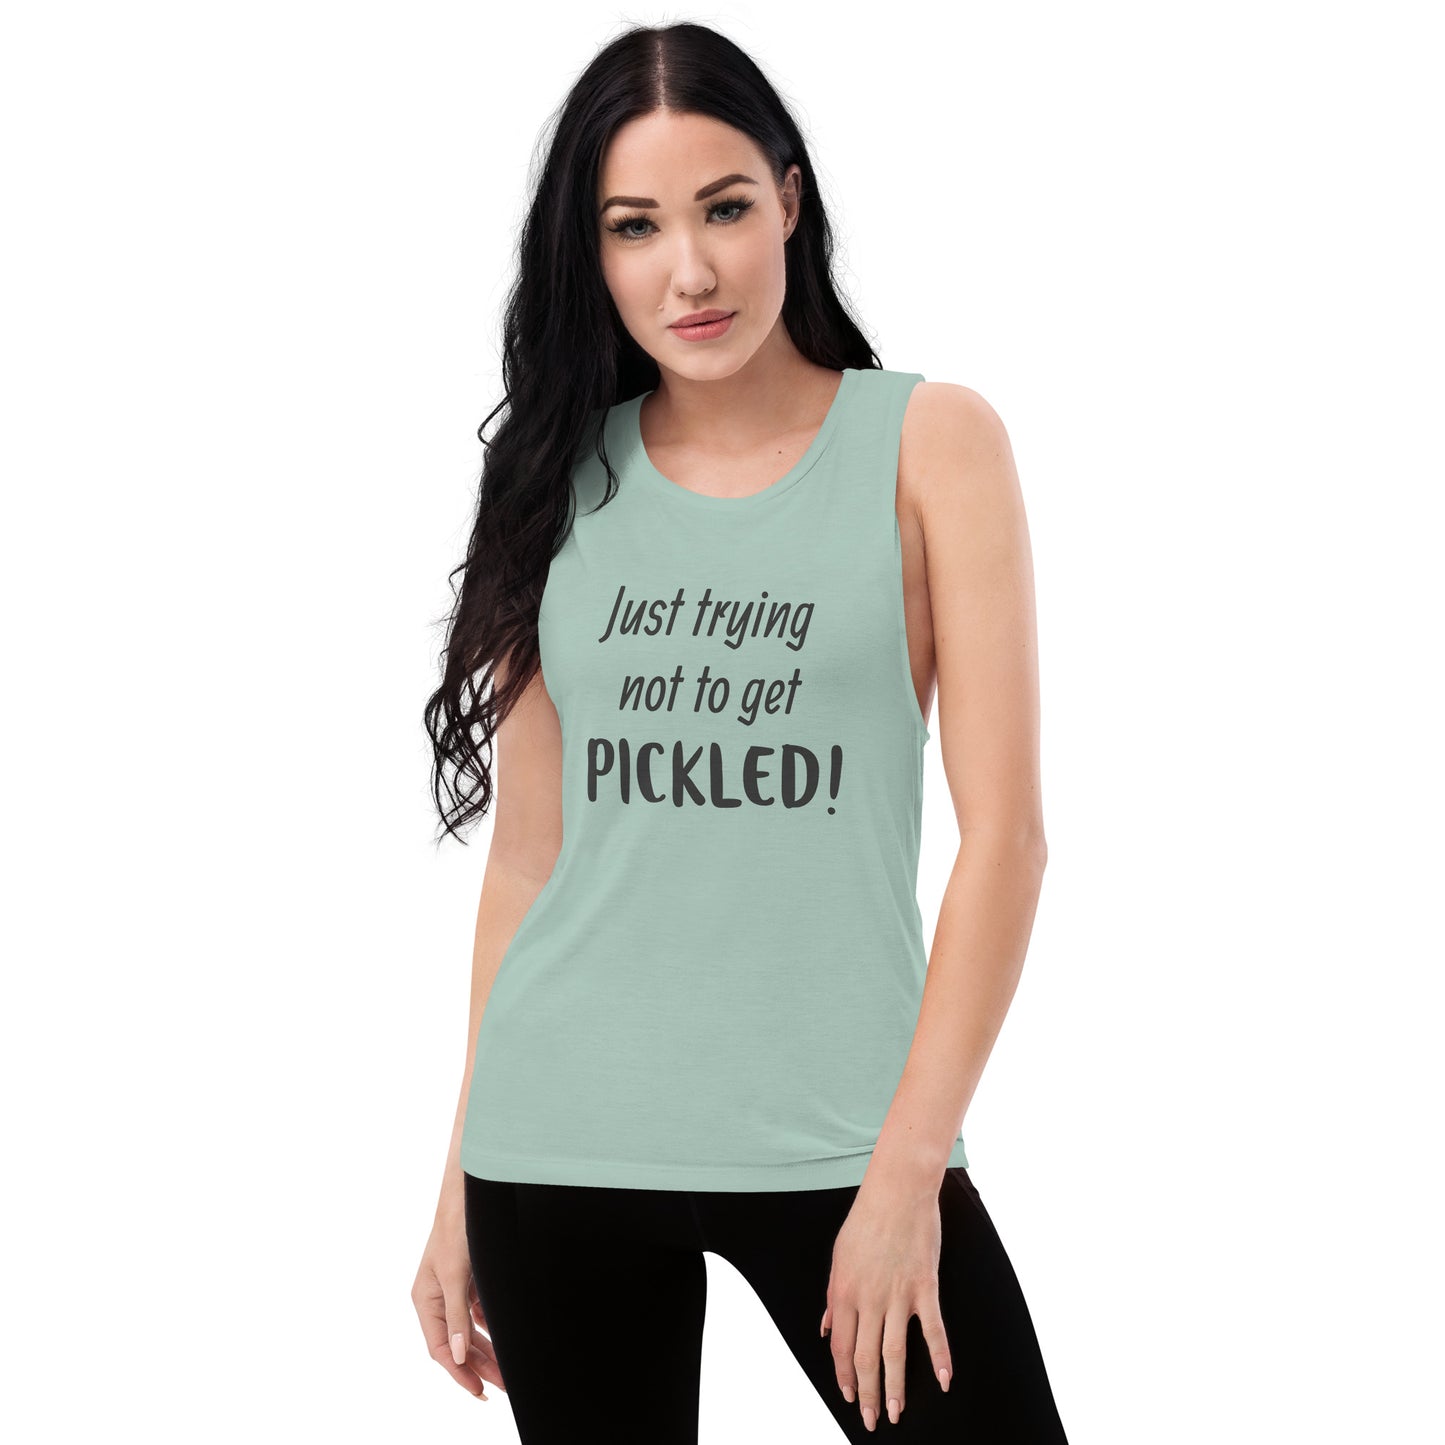 Trying not to get pickled - Ladies’ Muscle Tank